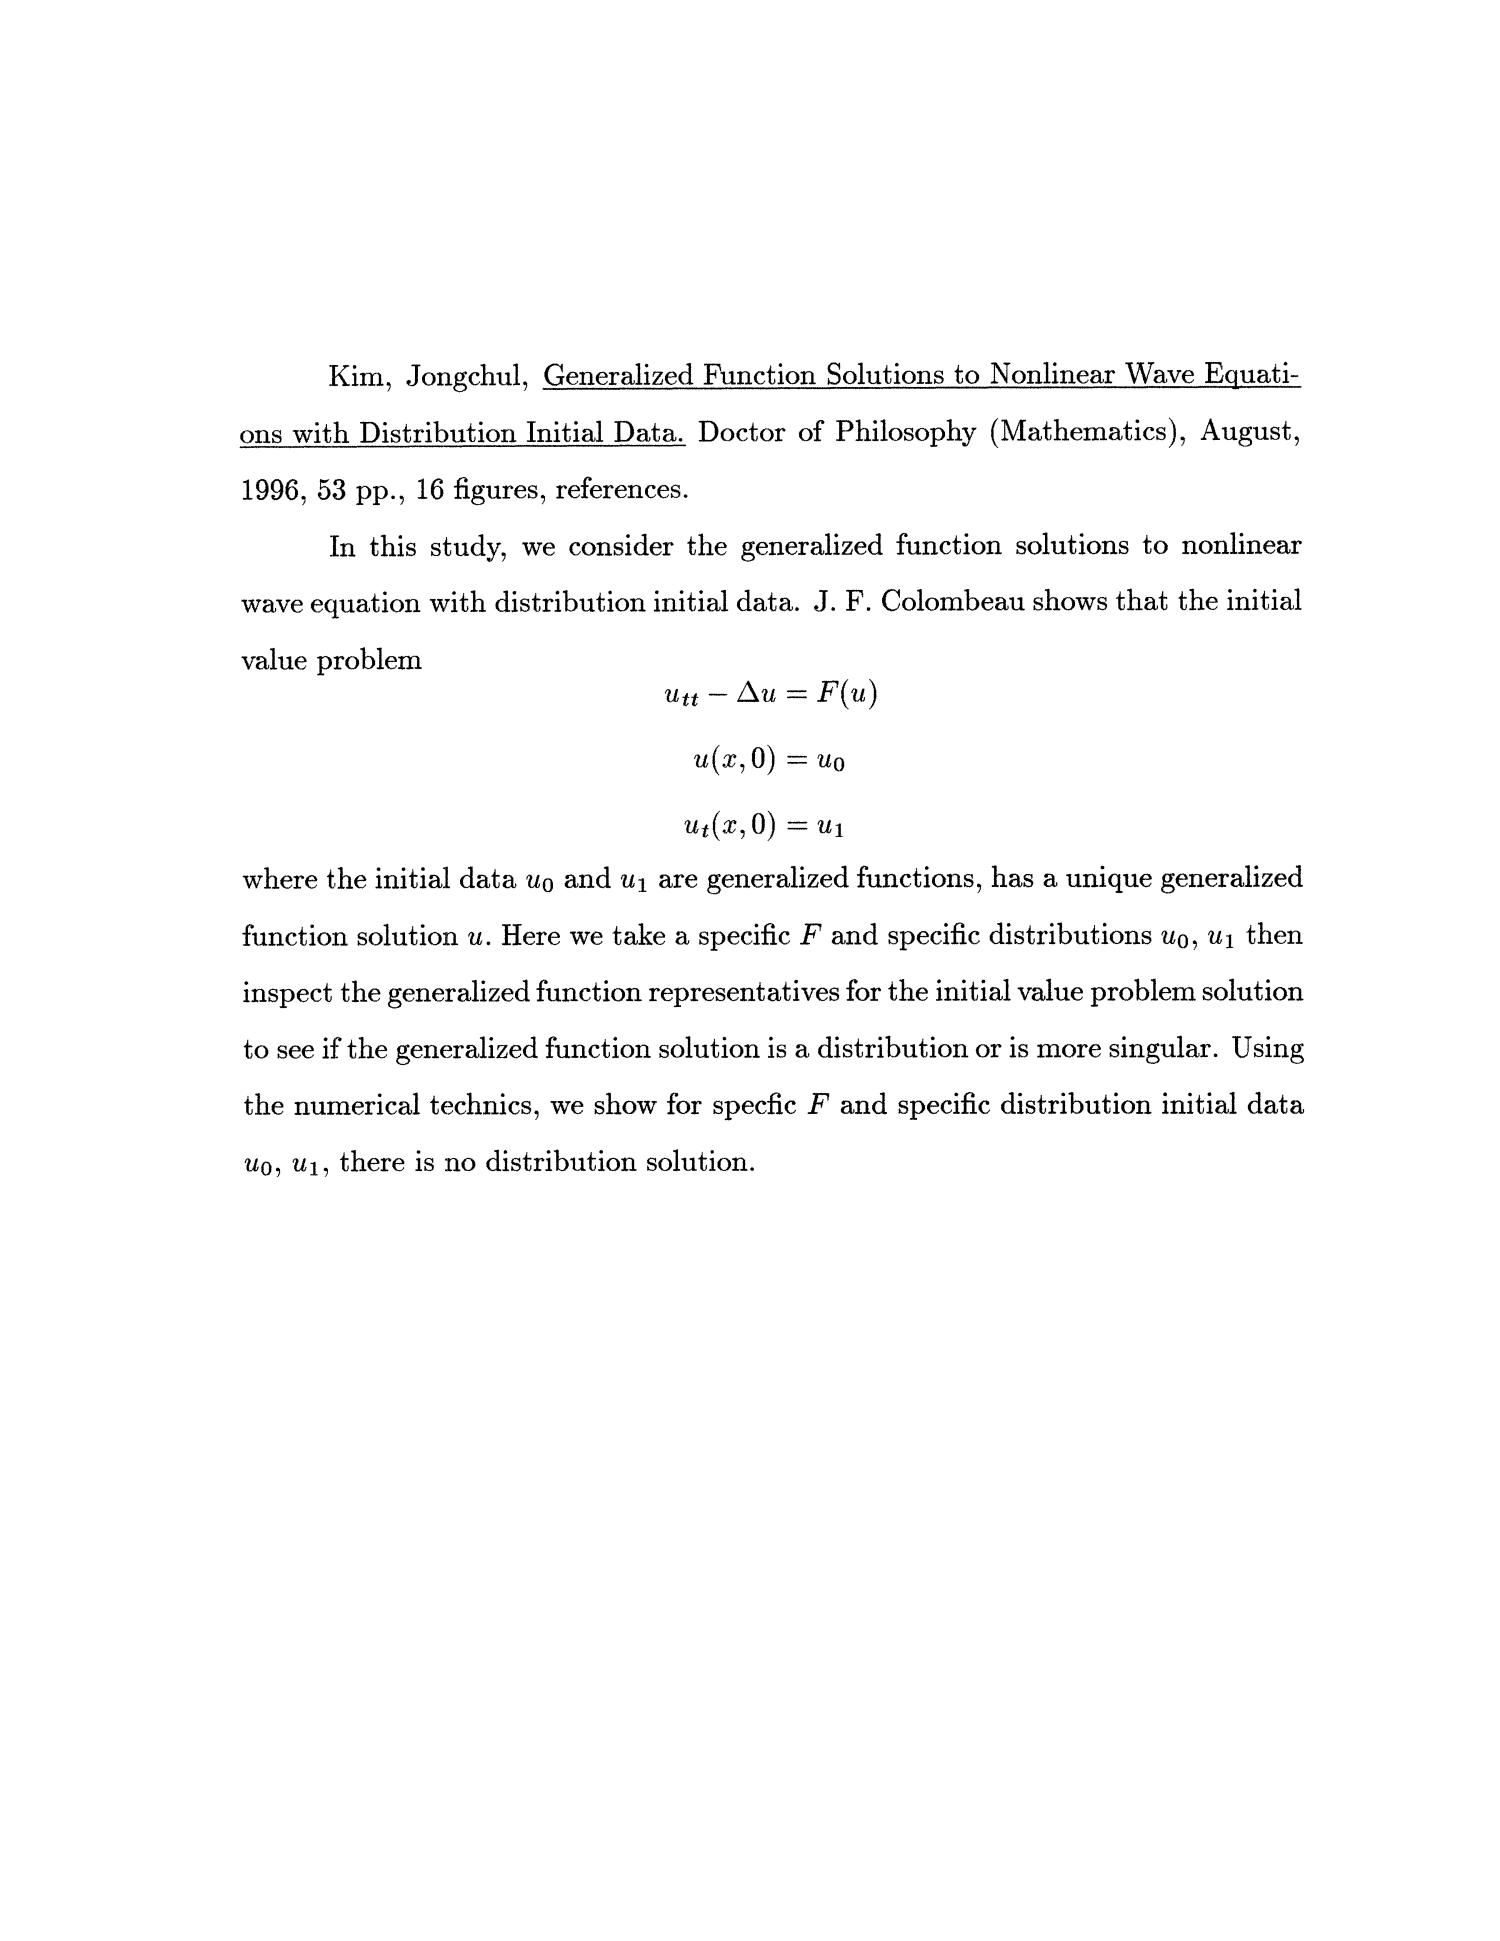 Generalized Function Solutions to Nonlinear Wave Equations with Distribution Initial Data
                                                
                                                    None
                                                